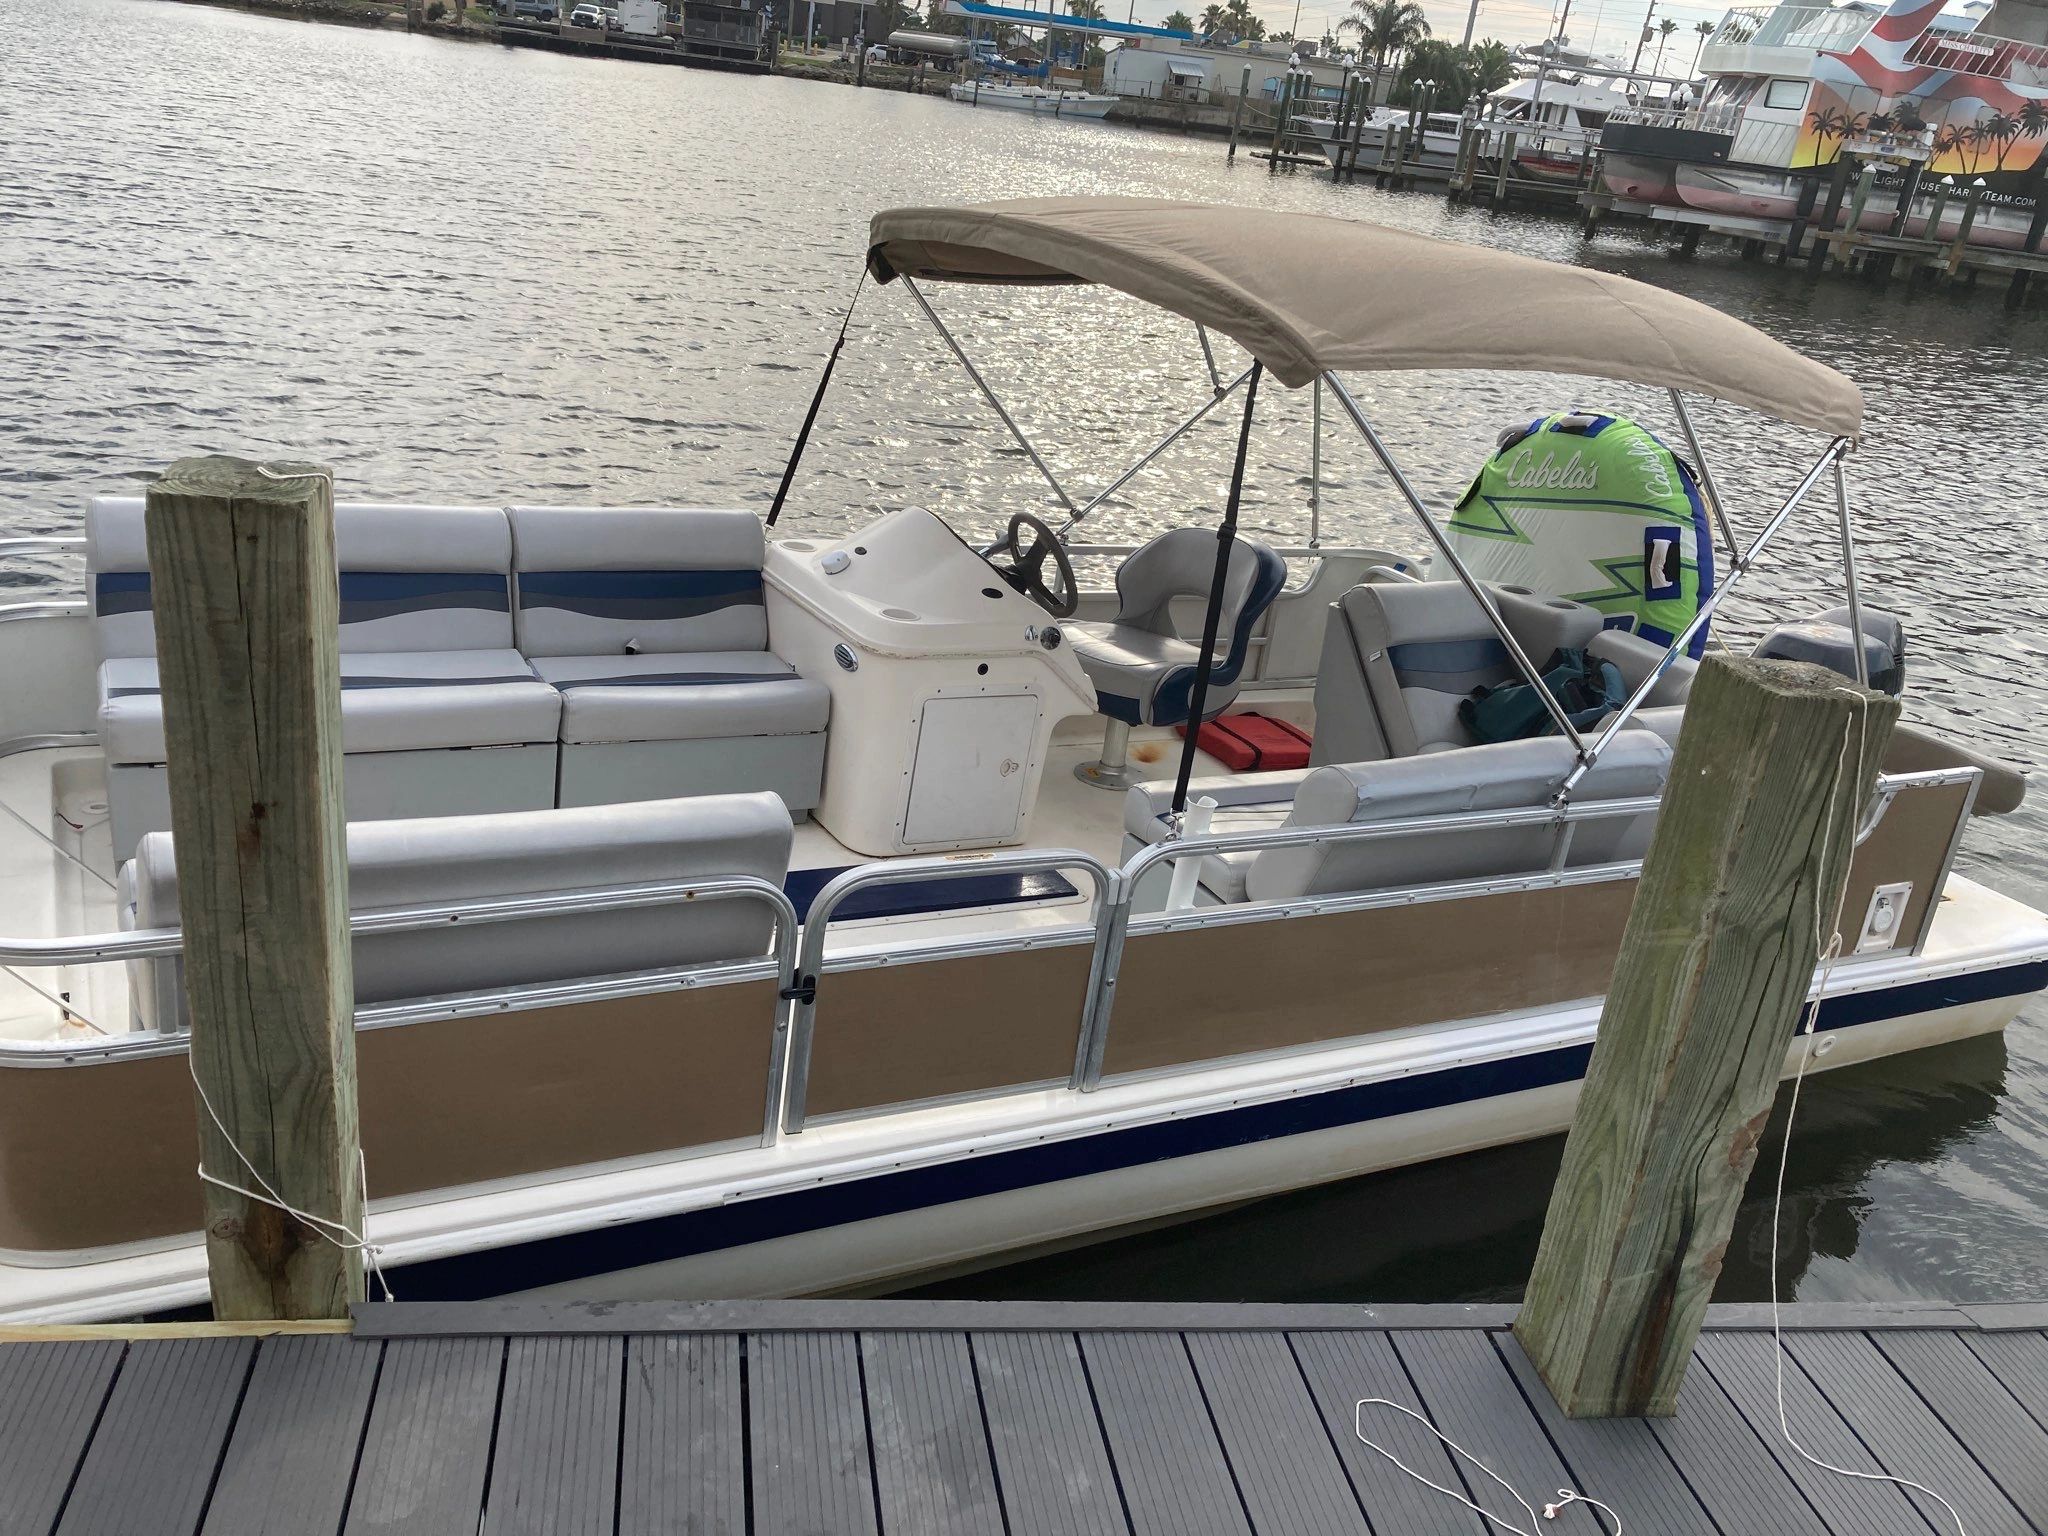 Our Deckboat Gloria! Ready to take you out tubing on the Bay!